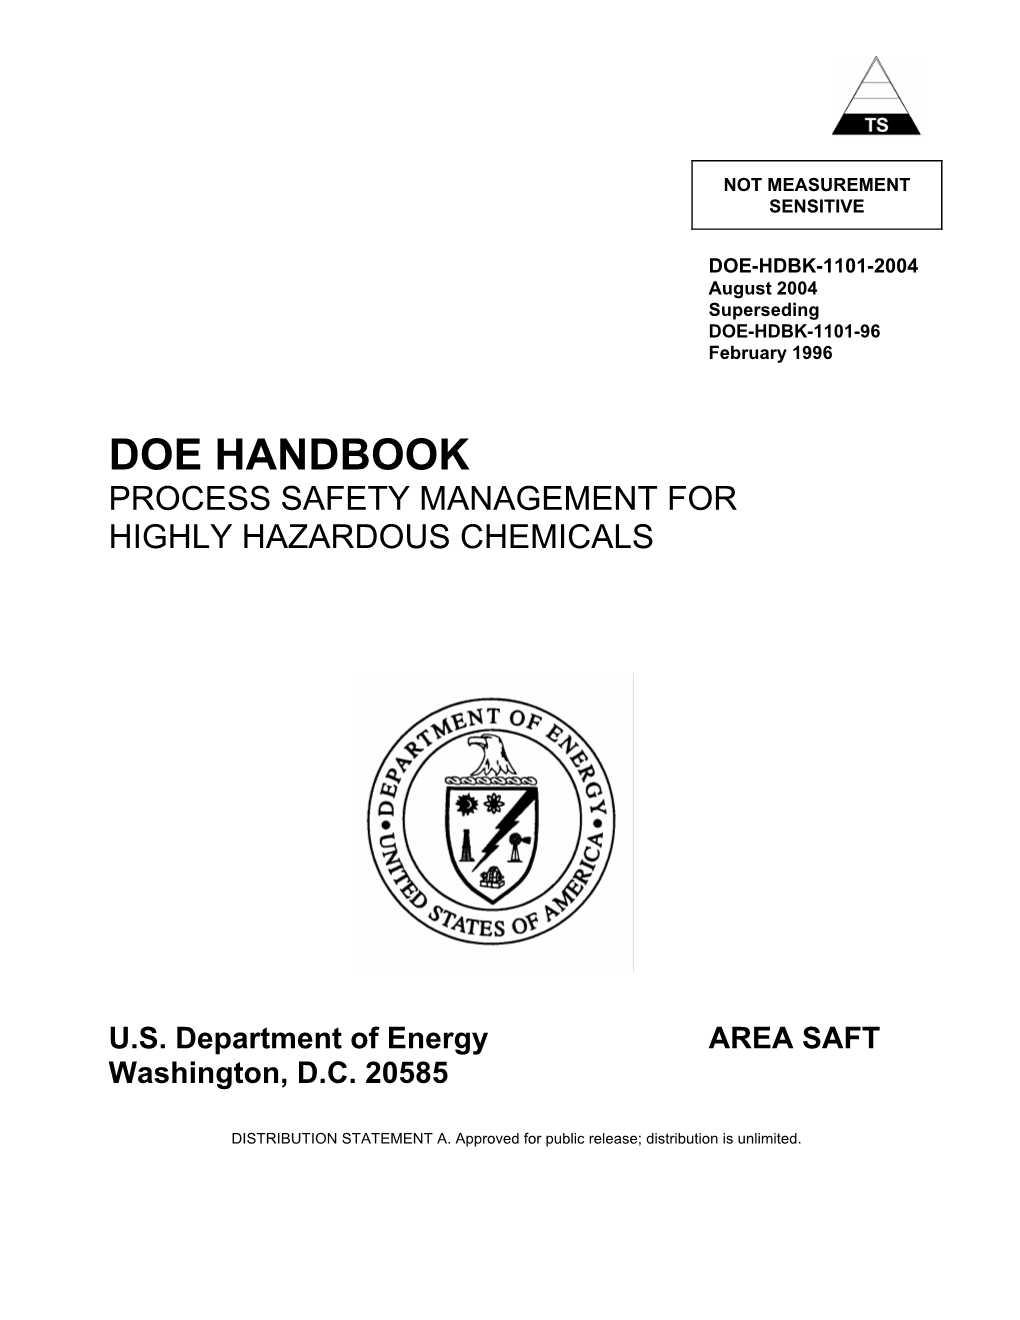 DOE-HDBK-1101-2004; Process Safety Management for Highly